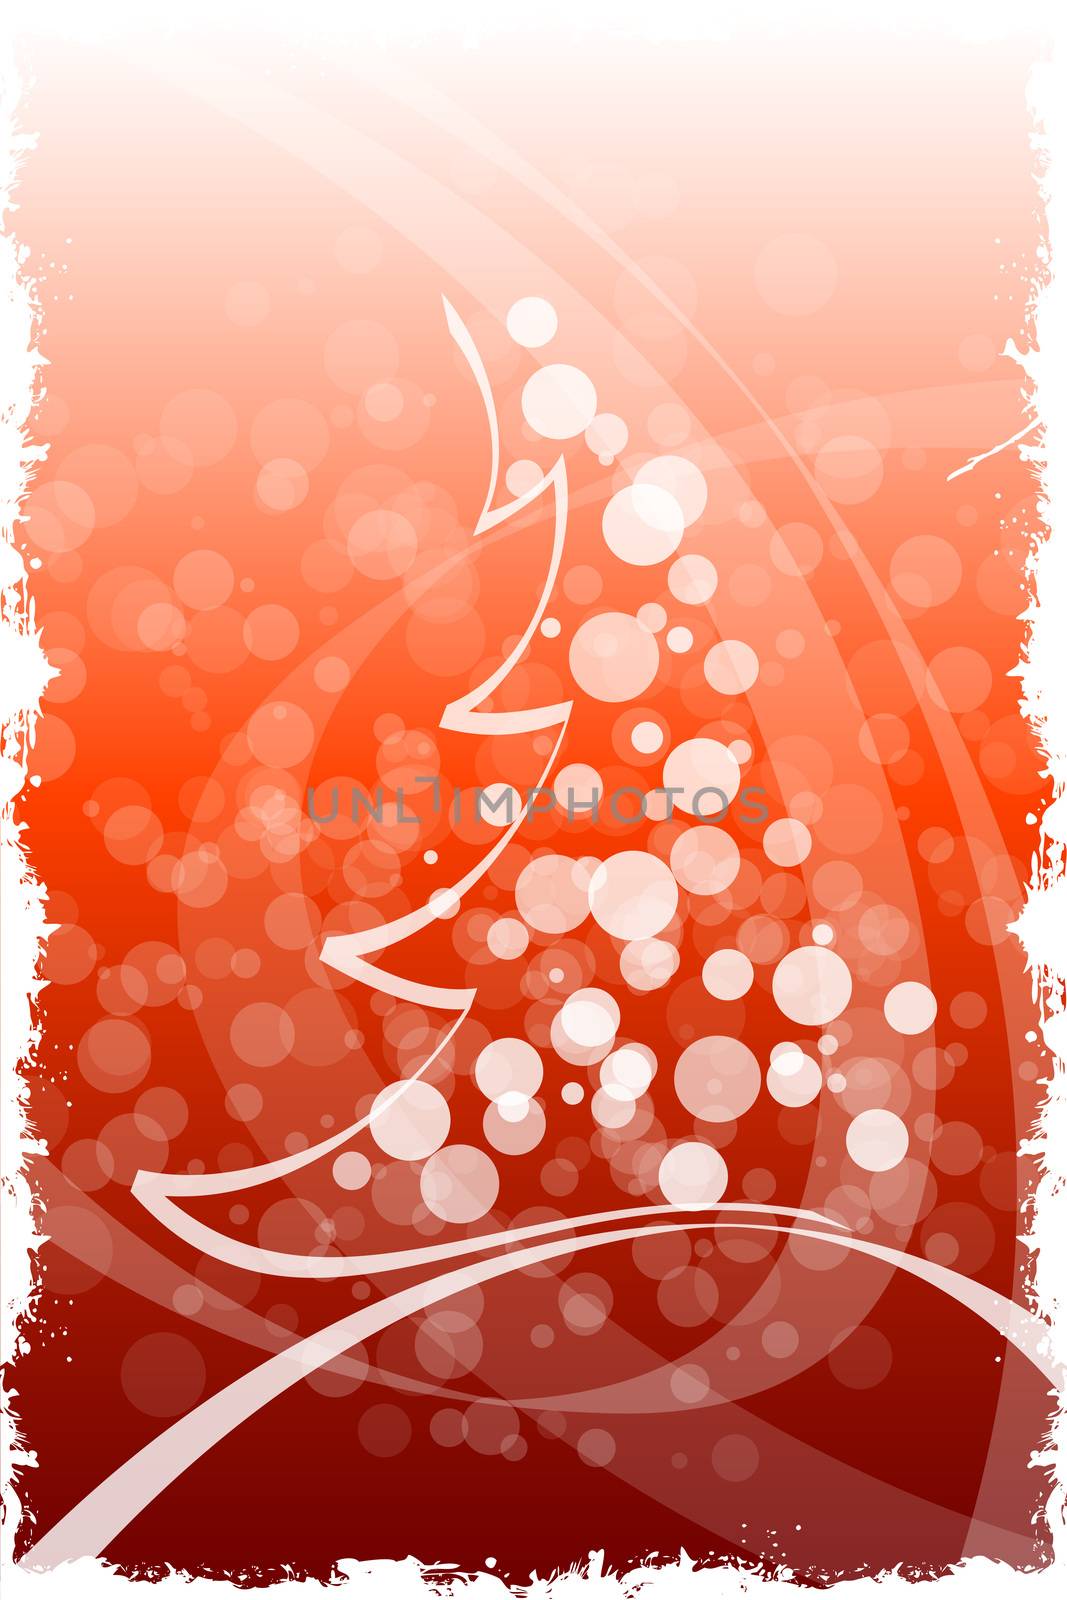 Abstract Grunge Winter and Christmas background in blue color